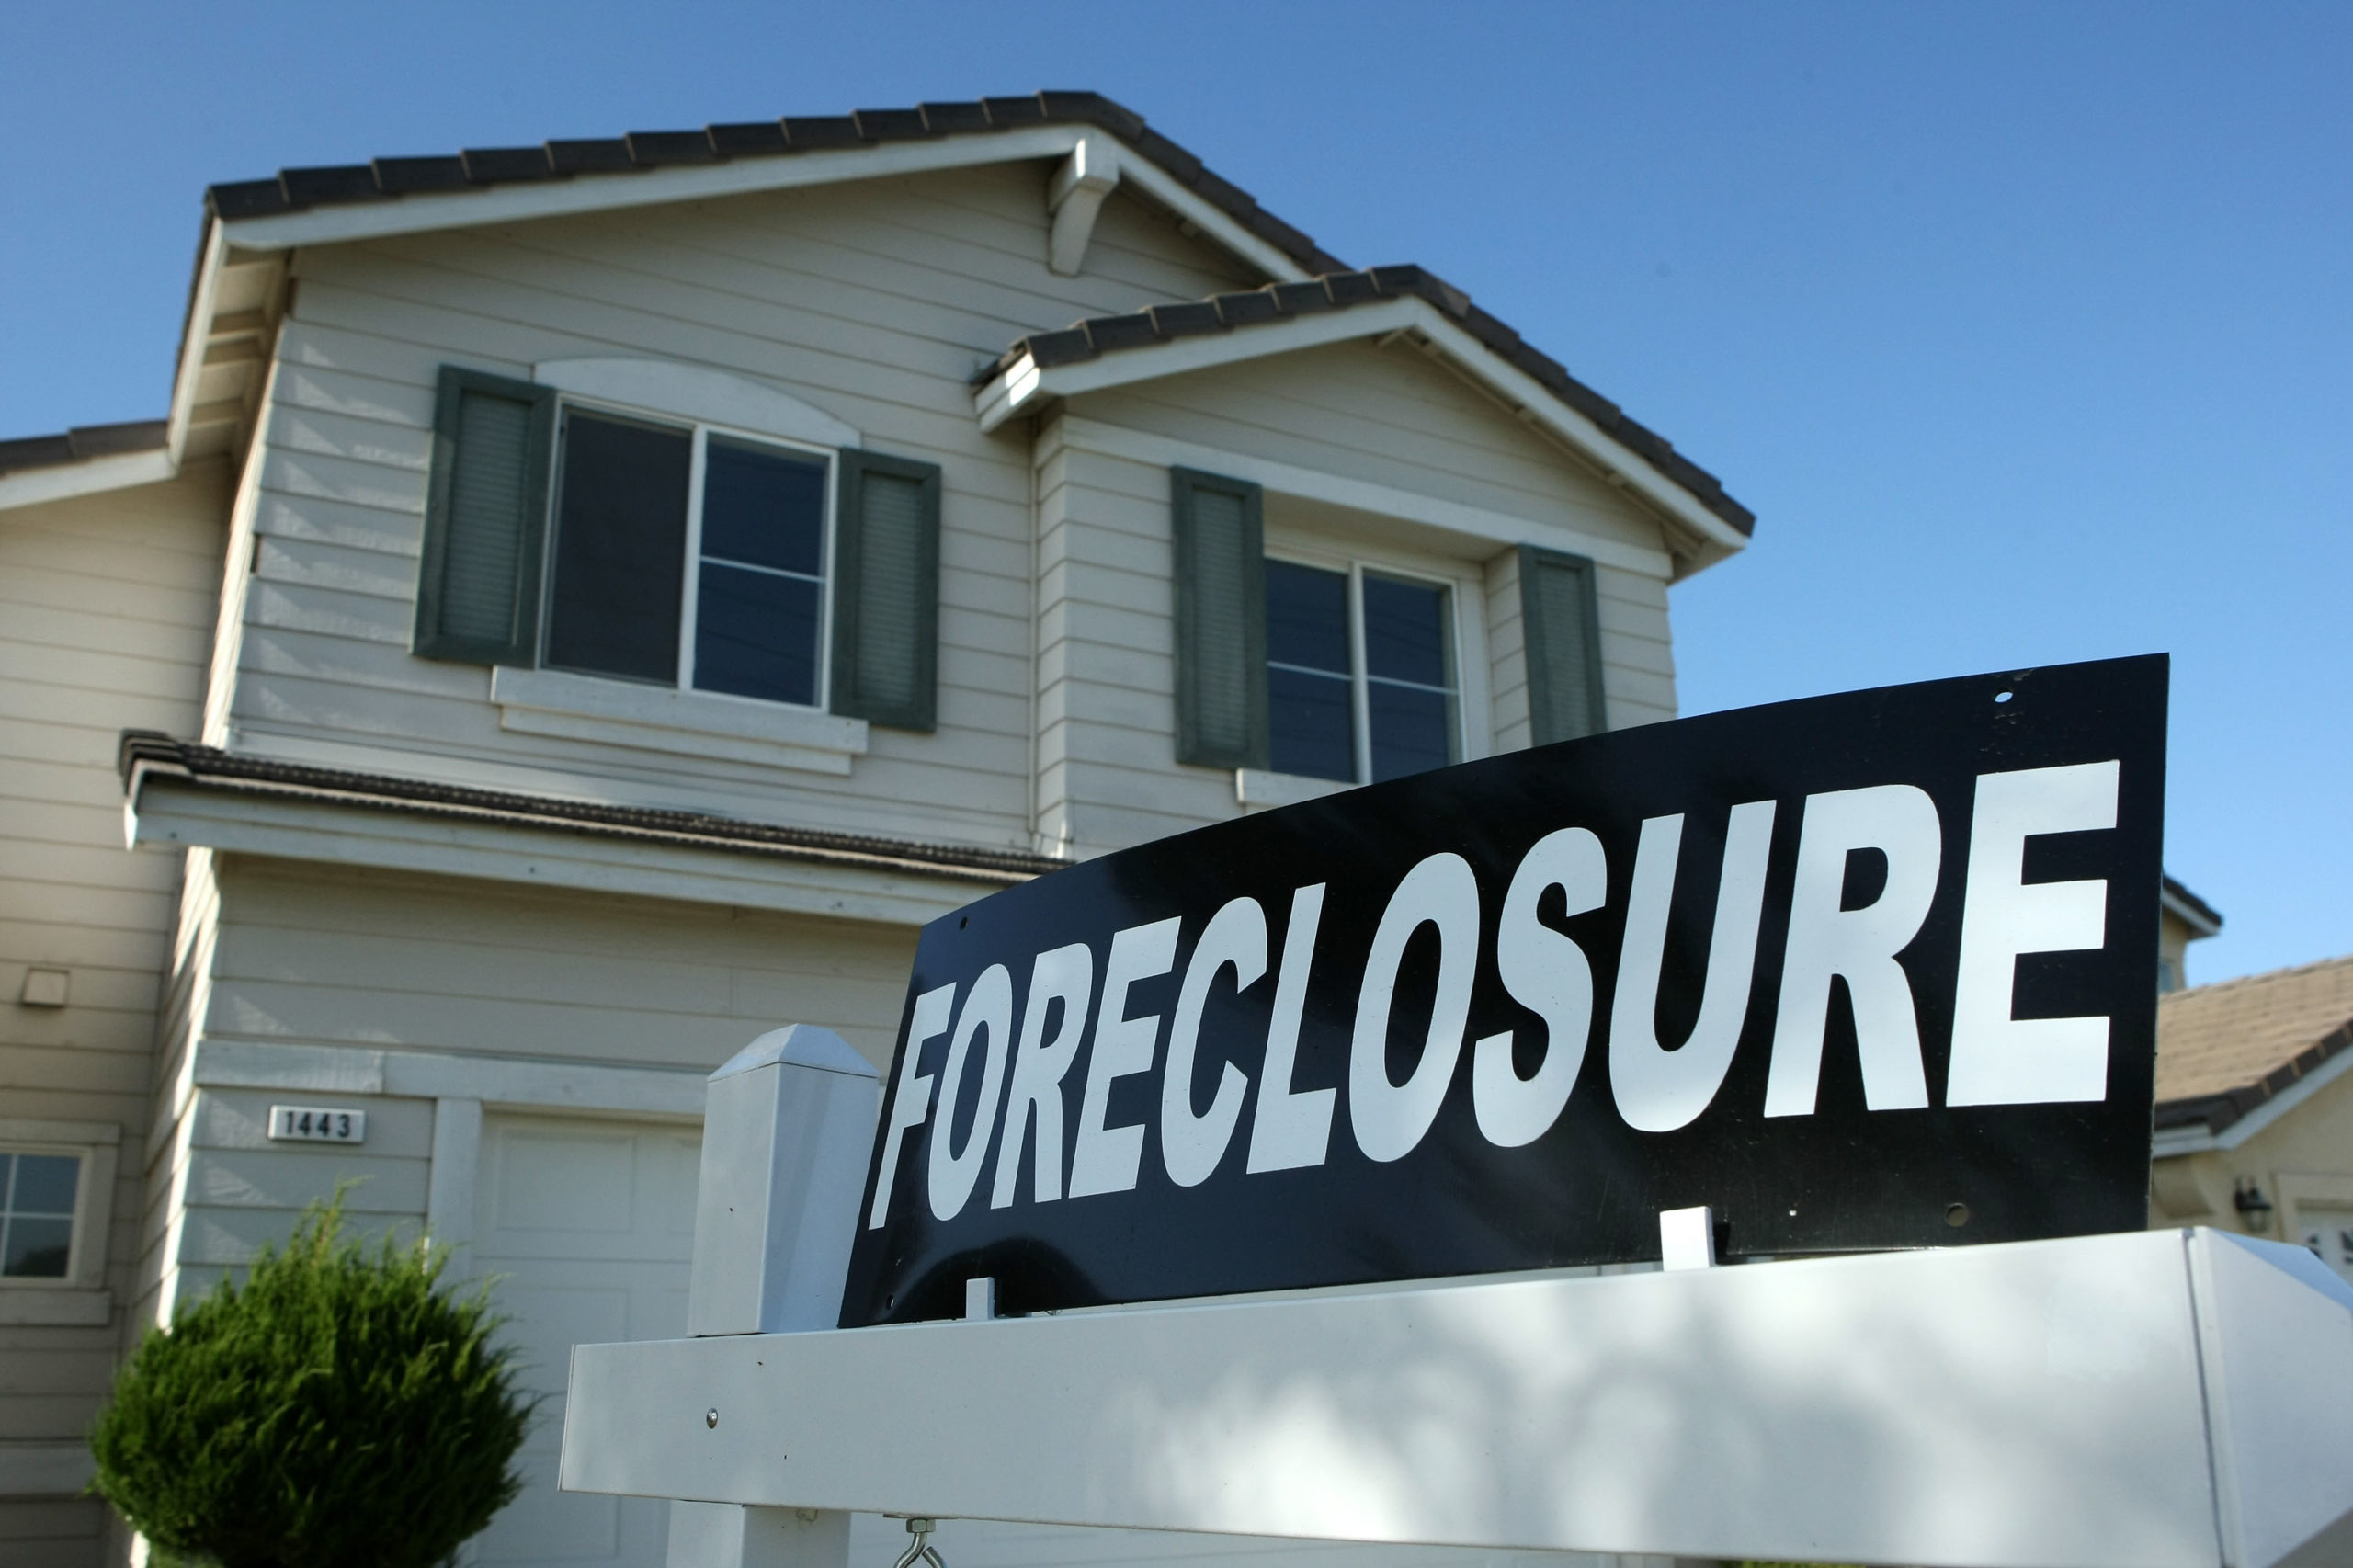 STOCKTON, CA - APRIL 29: A foreclosure sign sits in front of a home for sale April 29, 2008 in Stockton, California. As the nation continues to see widespread home loan foreclosures, Stockton, California led the nation with the highest foreclosure rate. One out of every 30 homes in Stockton is in foreclosure, close to seven times the national average for a metro area in the U.S. (Photo by Justin Sullivan/Getty Images)